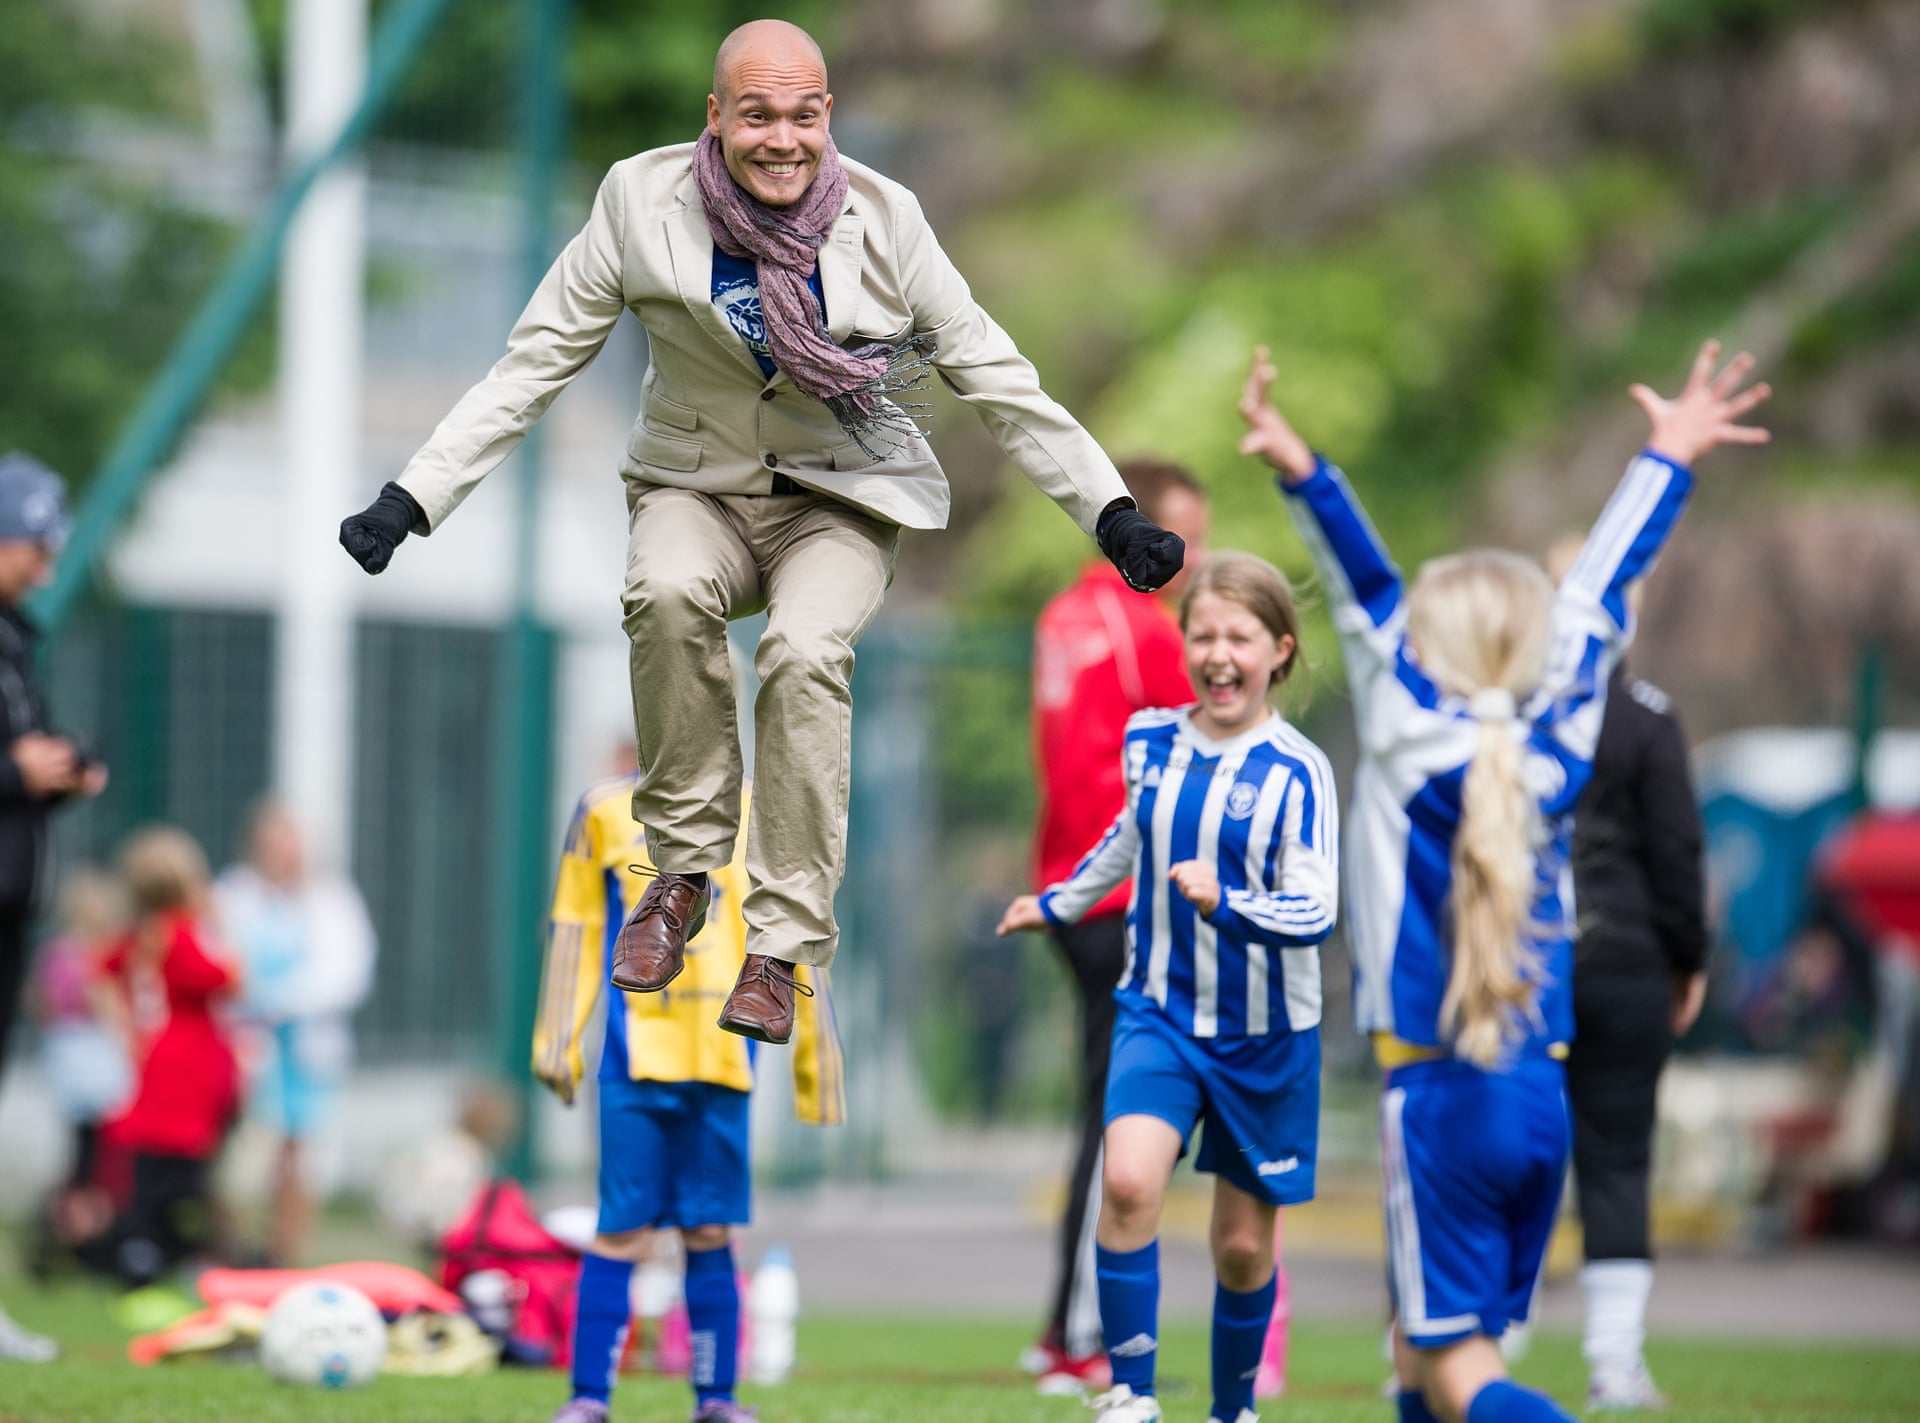 A finnish dad cheers his daughter on the sports field